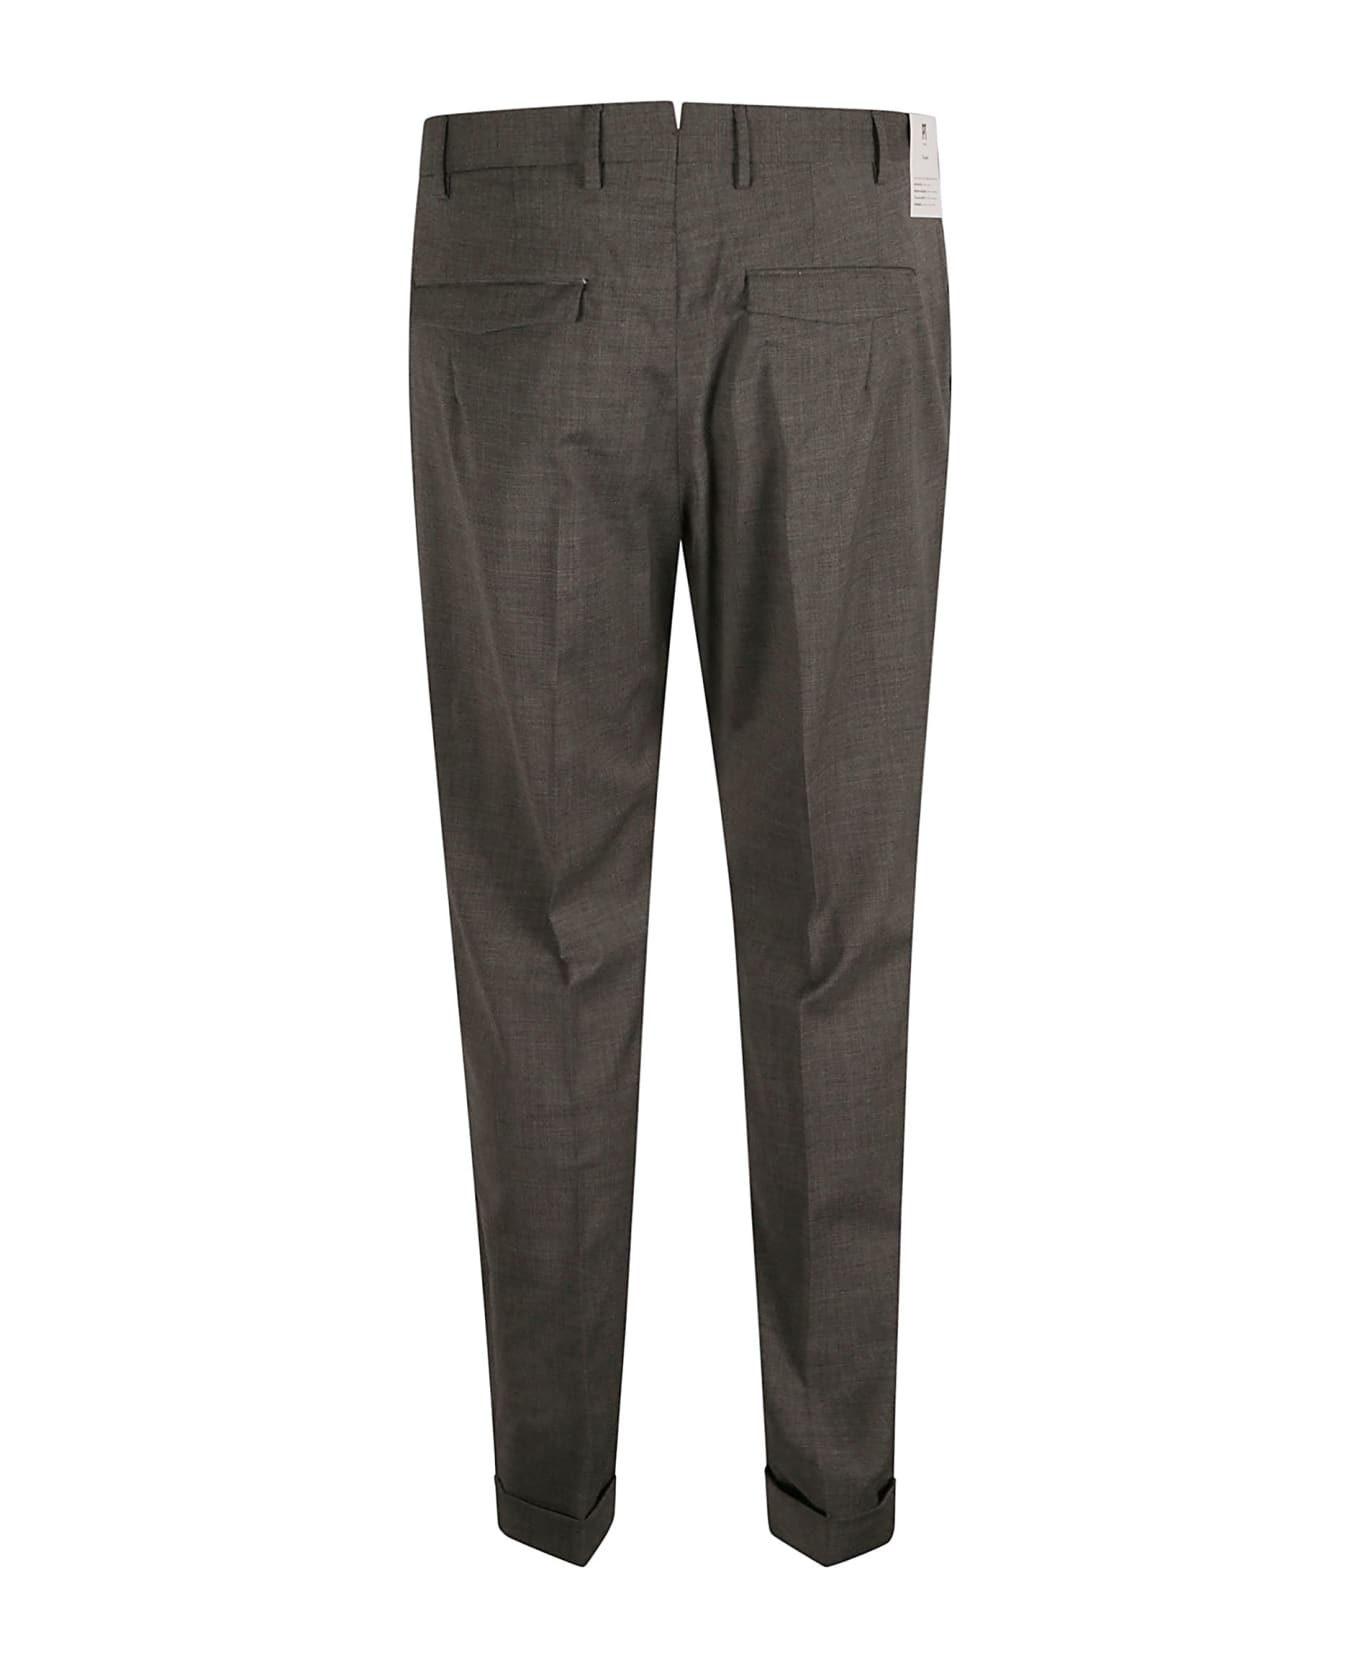 PT Torino Logo Patched Slim Fit Plain Trousers - Grey ボトムス